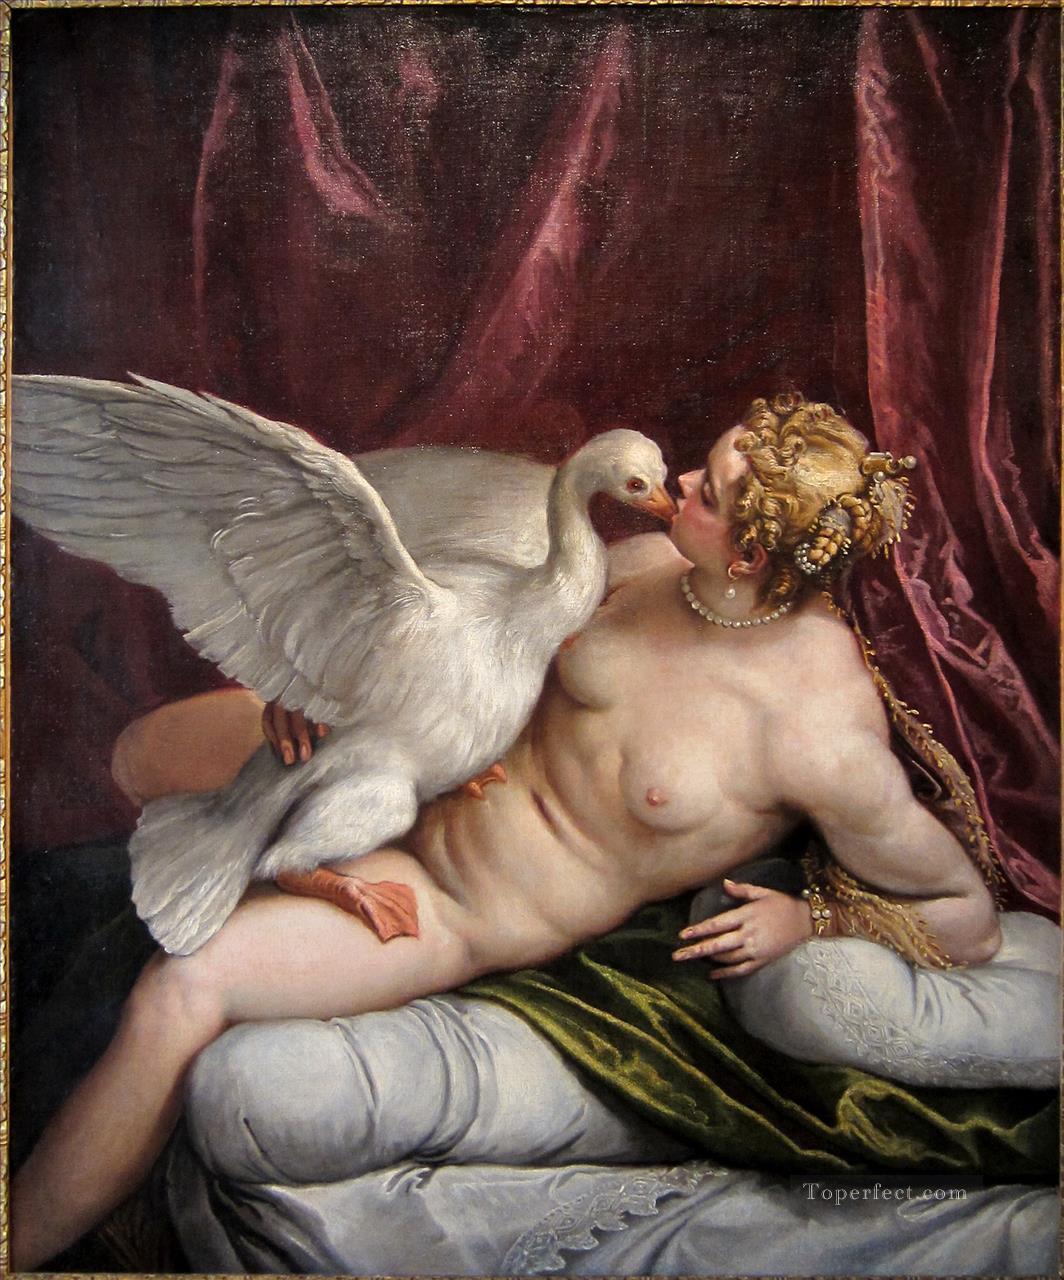 paolo veronese leda and the swan in the palace of fesch ajaccio Classic nude Oil Paintings